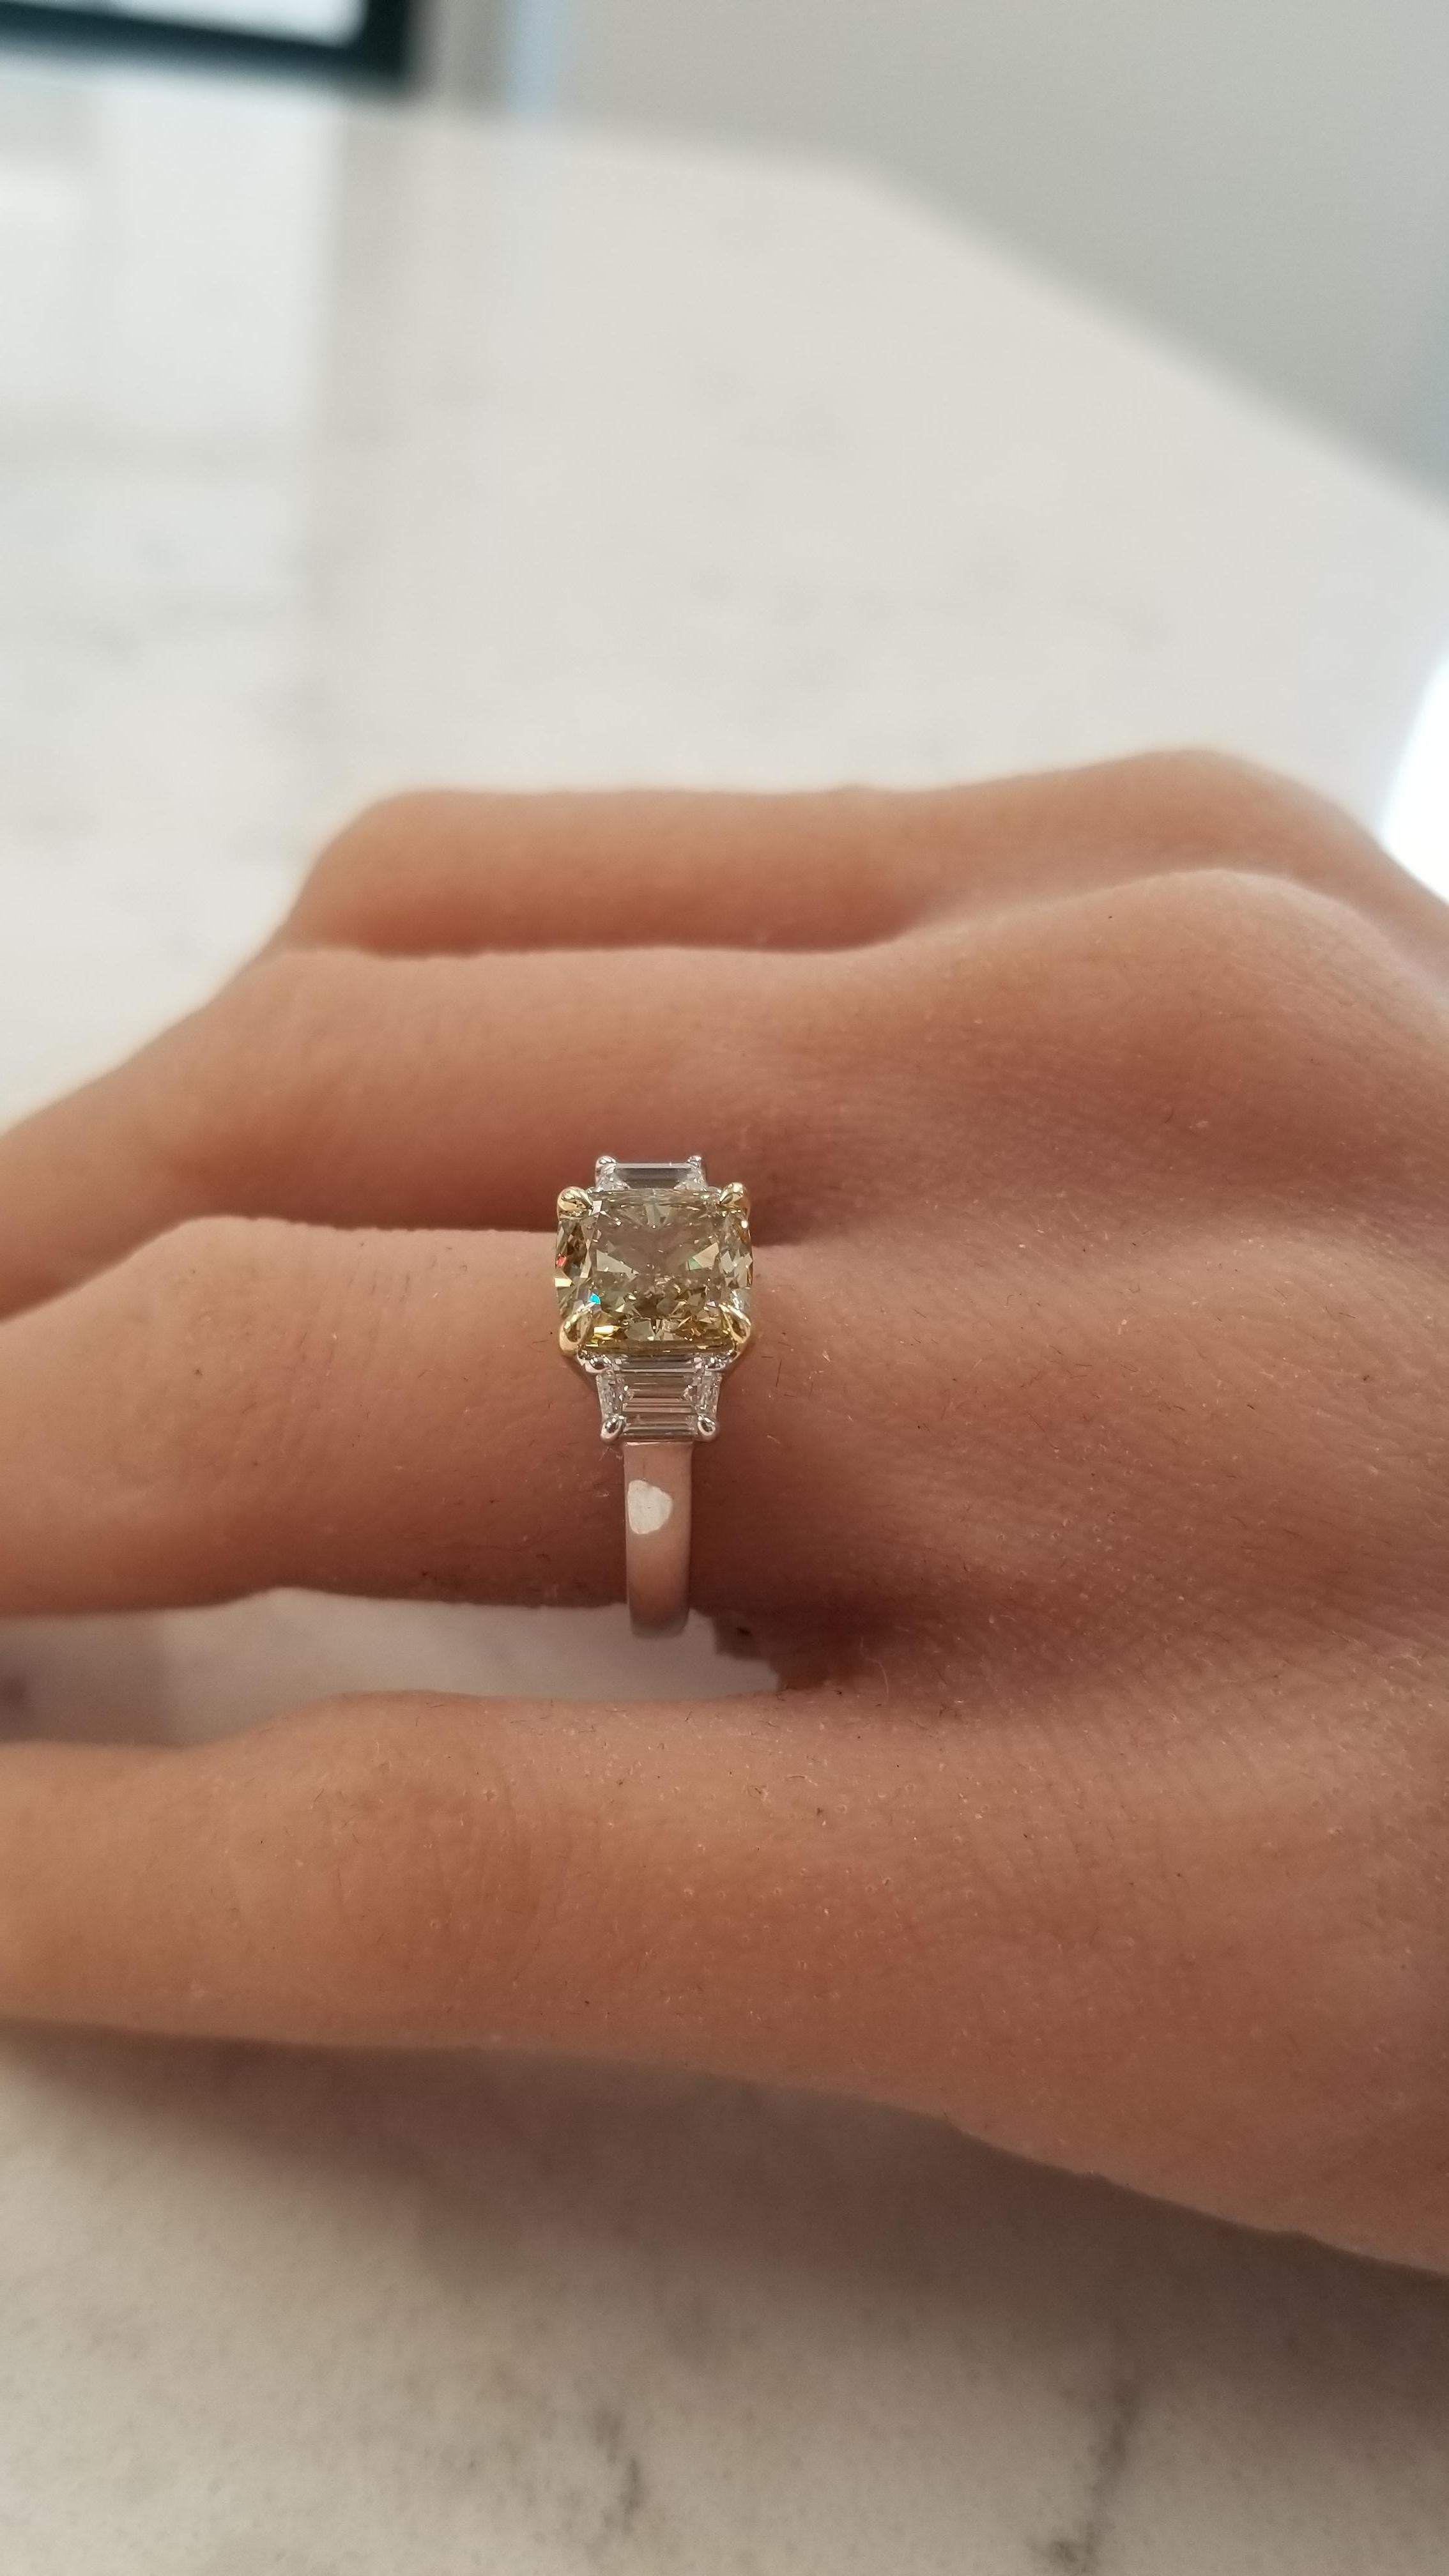 This special three stone ring features a 3.00 carat cushion cut fancy brownish yellow diamond in a rich yellow gold prong setting in the center. The color resembles a mix of golden honey and cinnamon. This gorgeous center stone is flanked by two